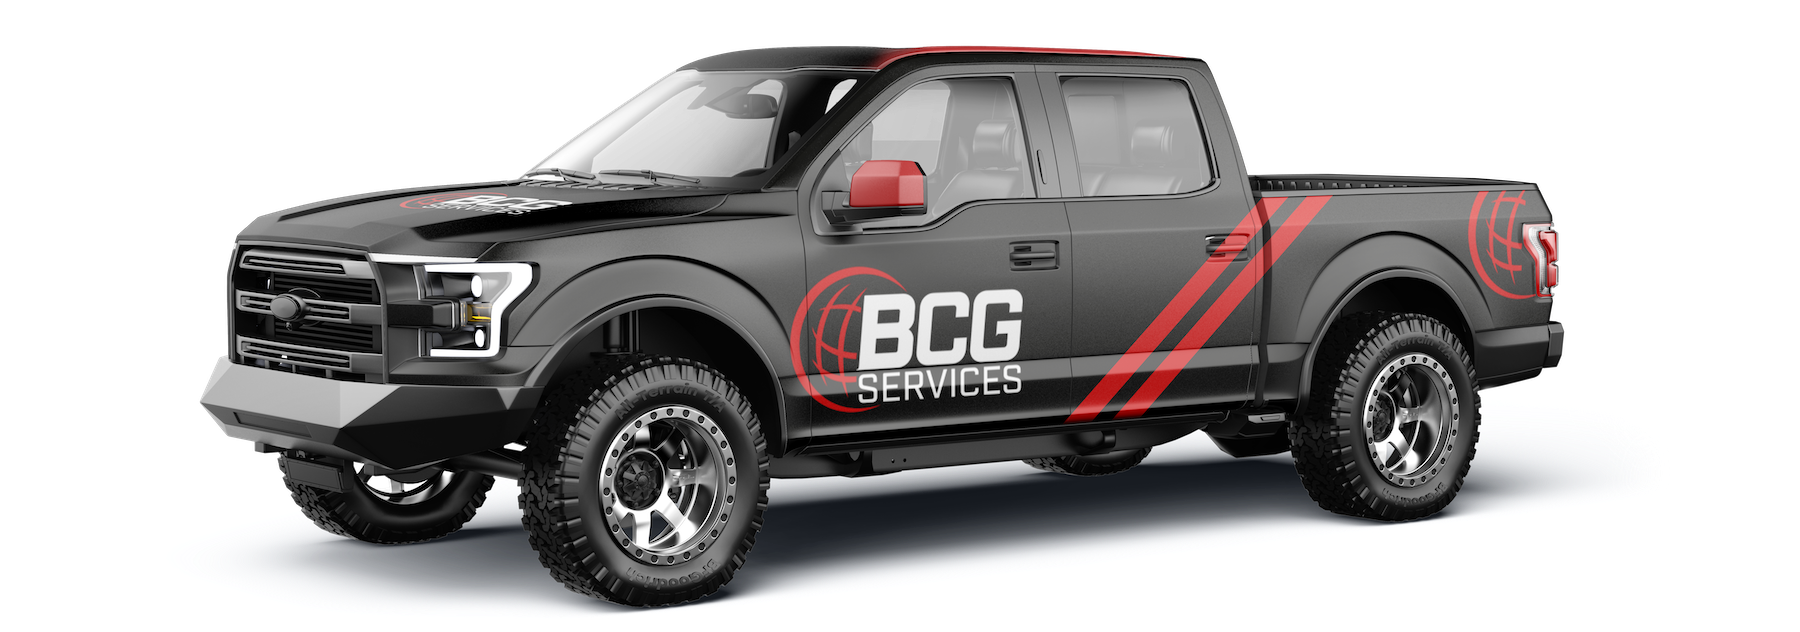 bcg services truck